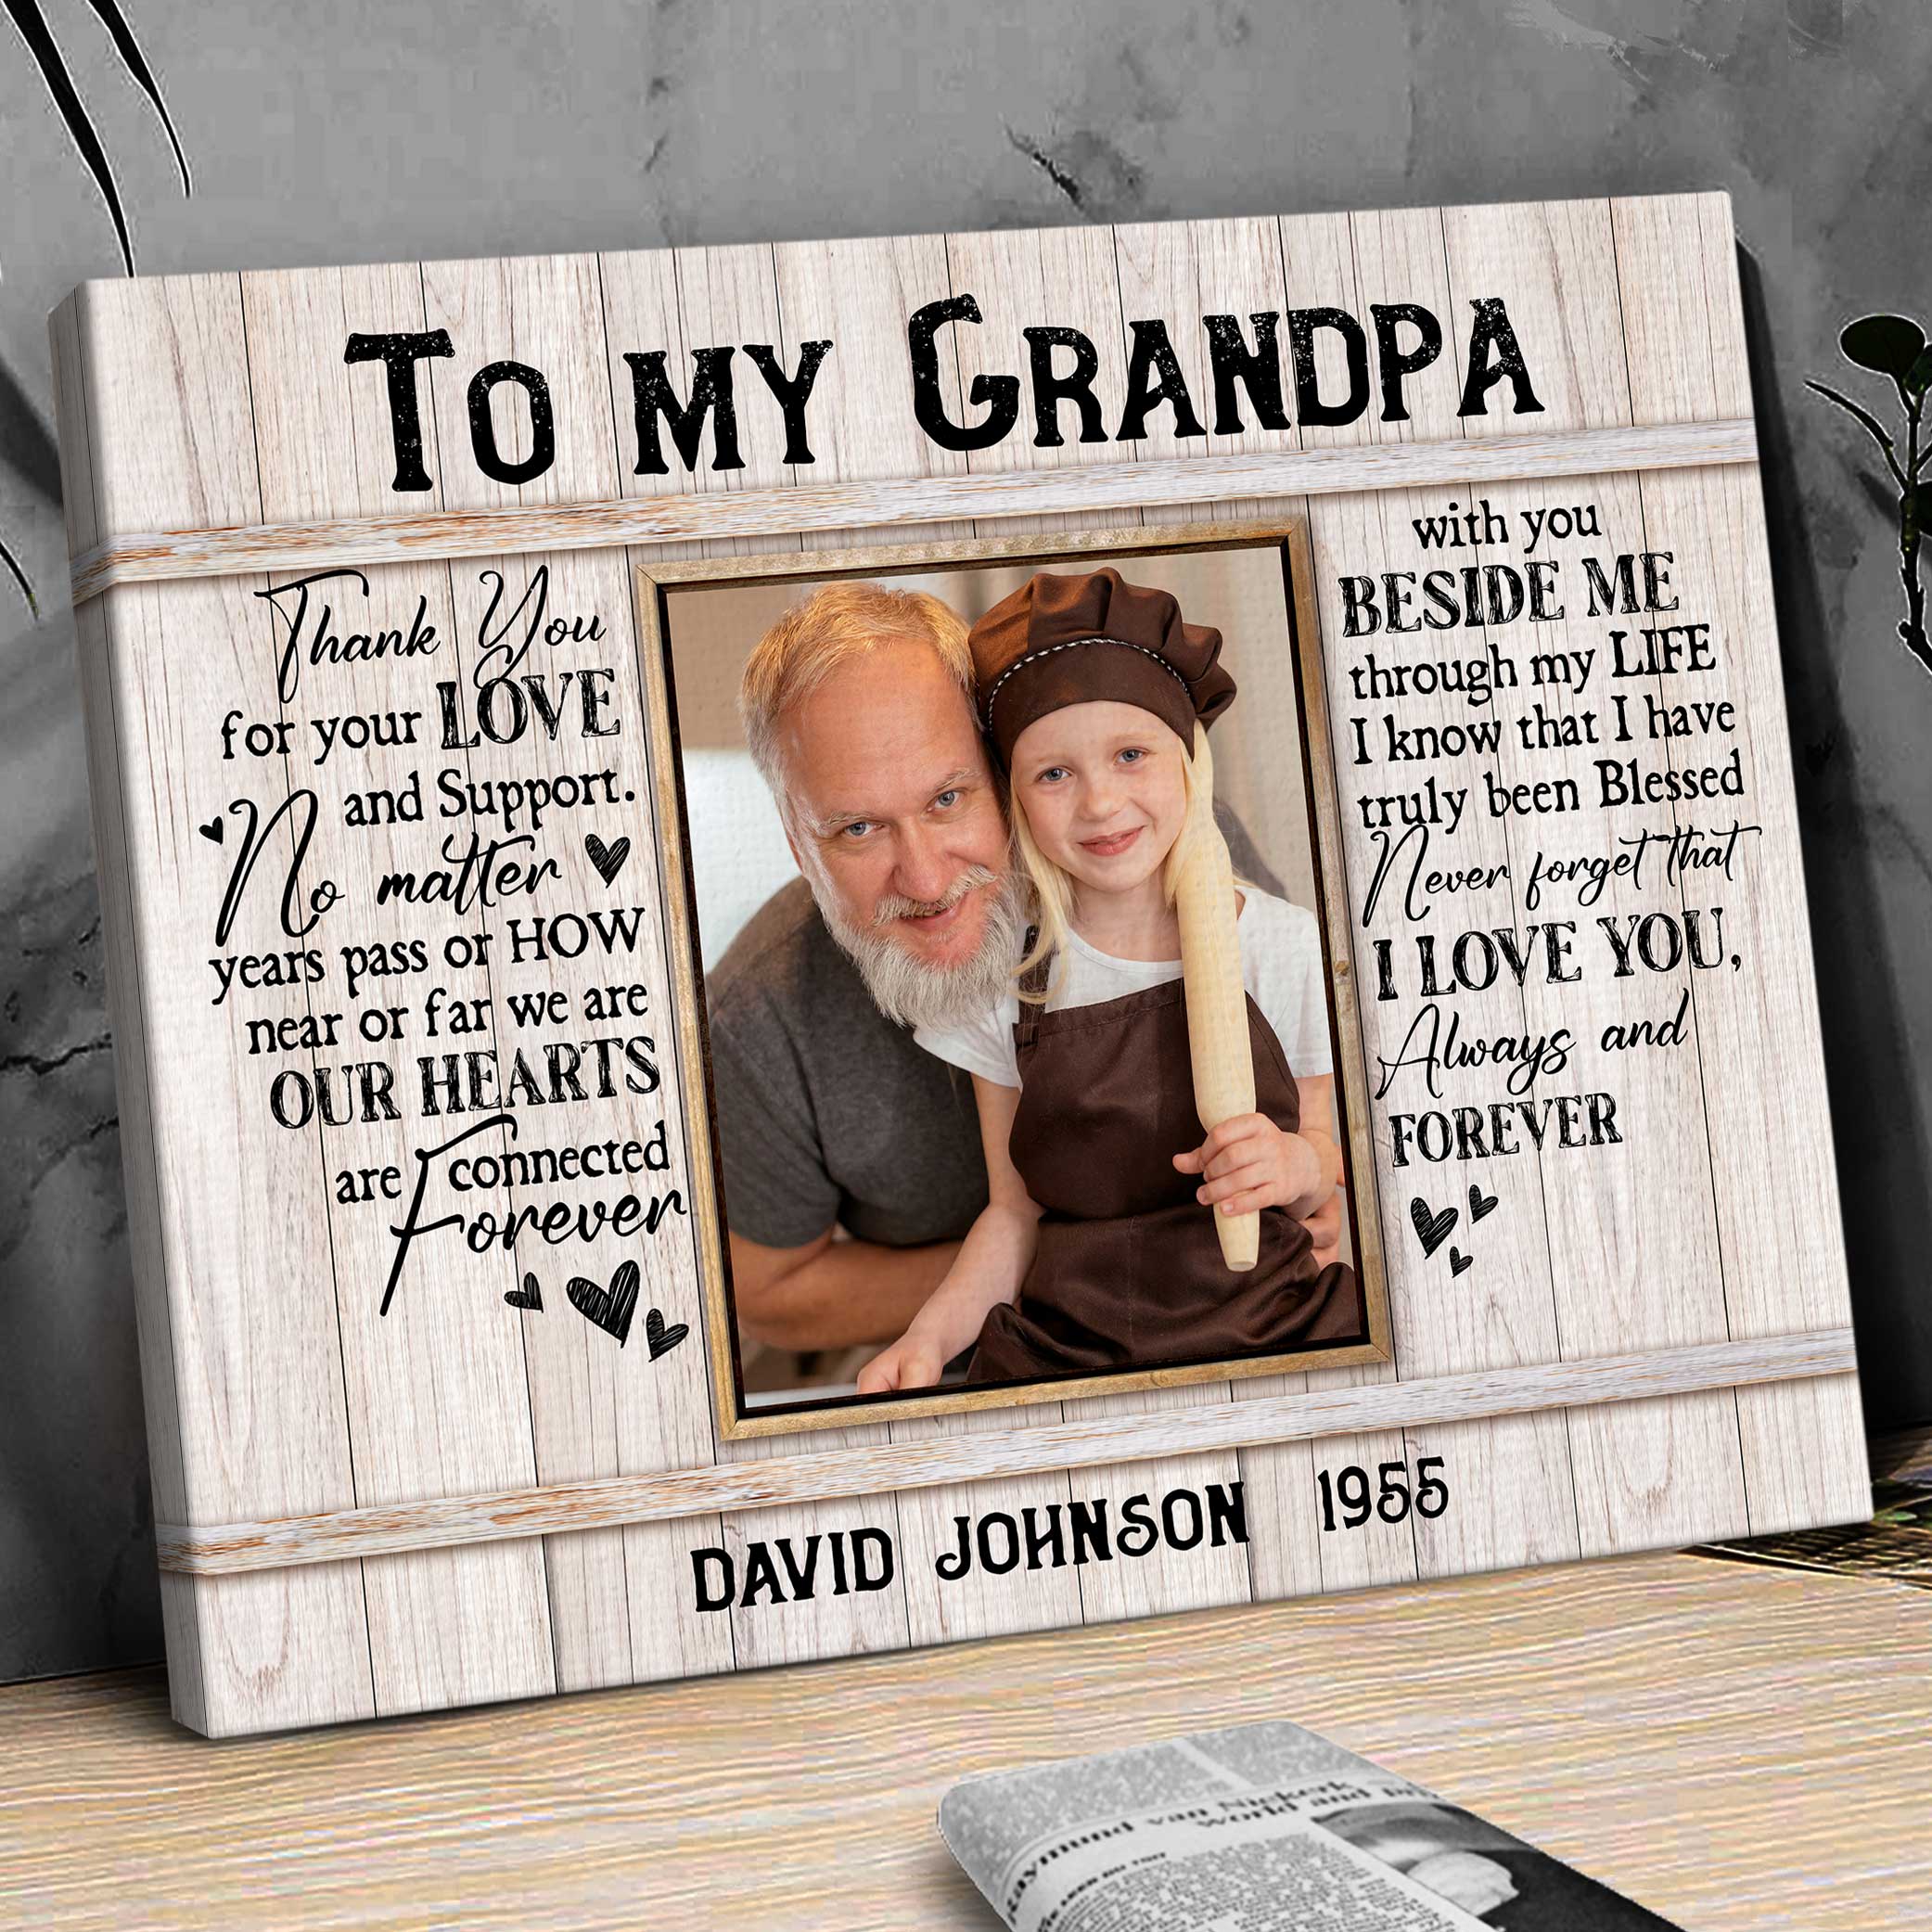 20 Best Father's Day Gifts for Grandpa - Grandfather Gifts for Father's Day